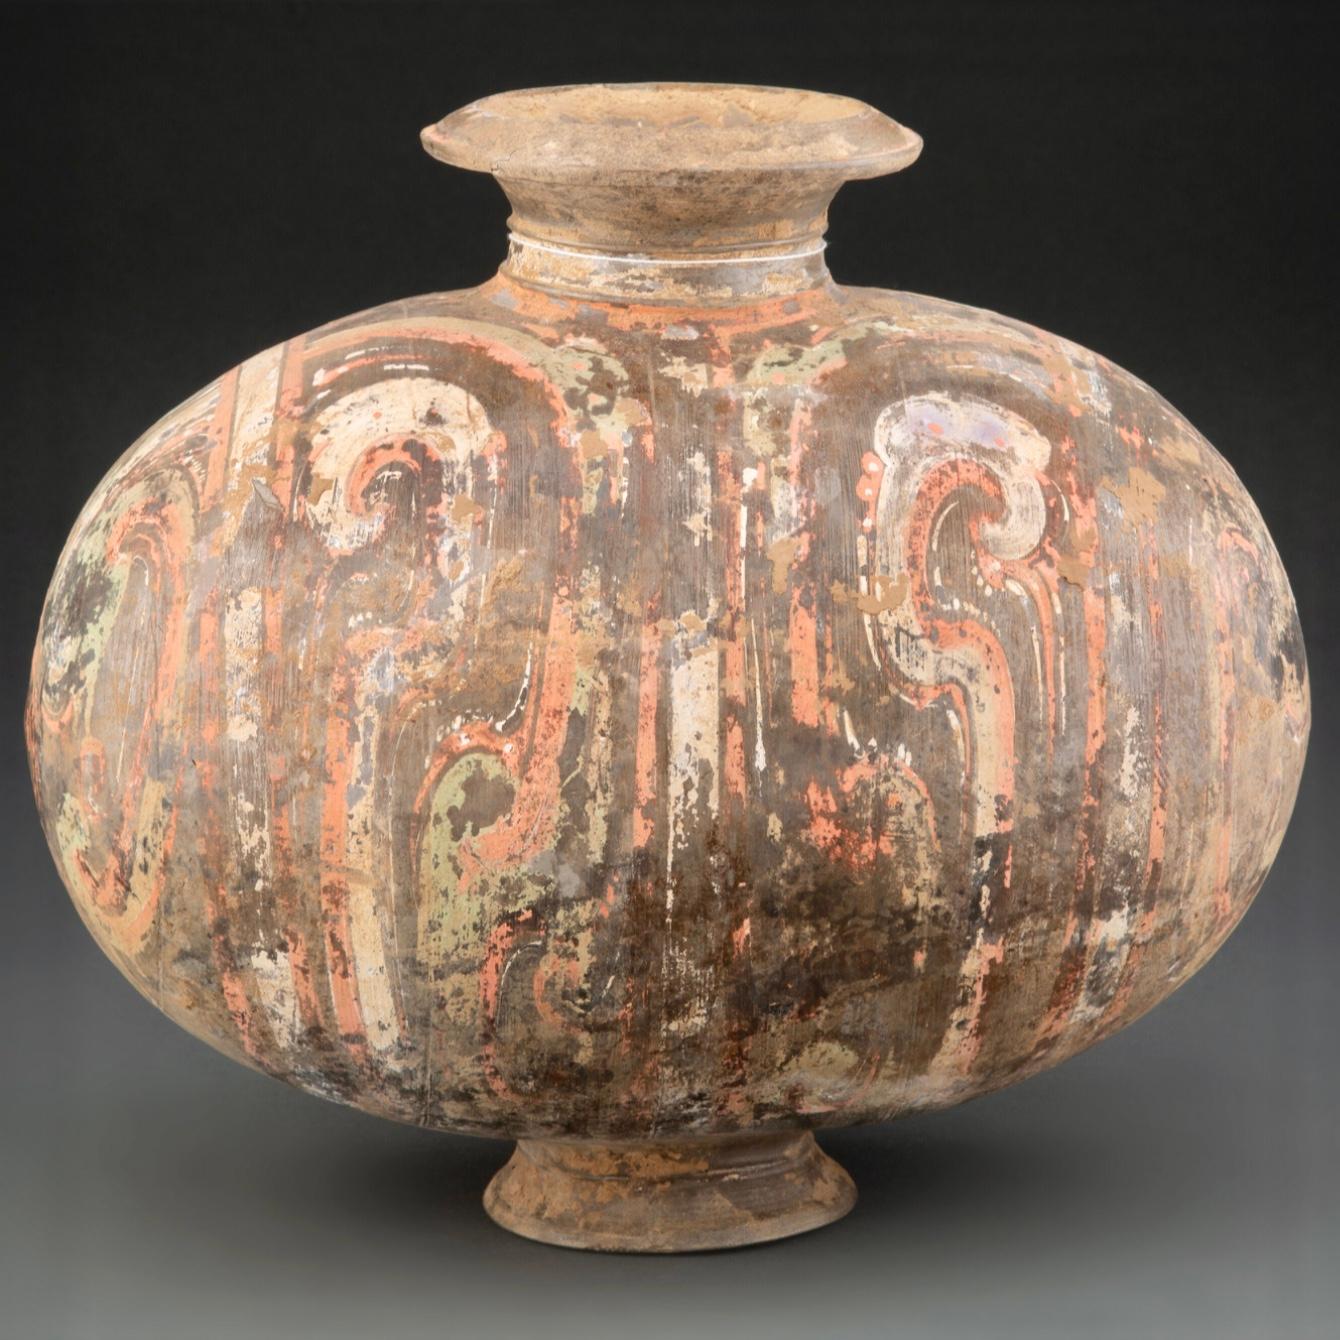 A Chinese pottery Cocoon jar, Han Dynasty
Dimensions: 12.25 x 13 x 8.5 inches (31.1 x 33.0 x 21.6 cm)

This painted earthenware likely was a funerary offering in a Han Dynasty tomb, one of a suite of goods that accompanied the deceased into the